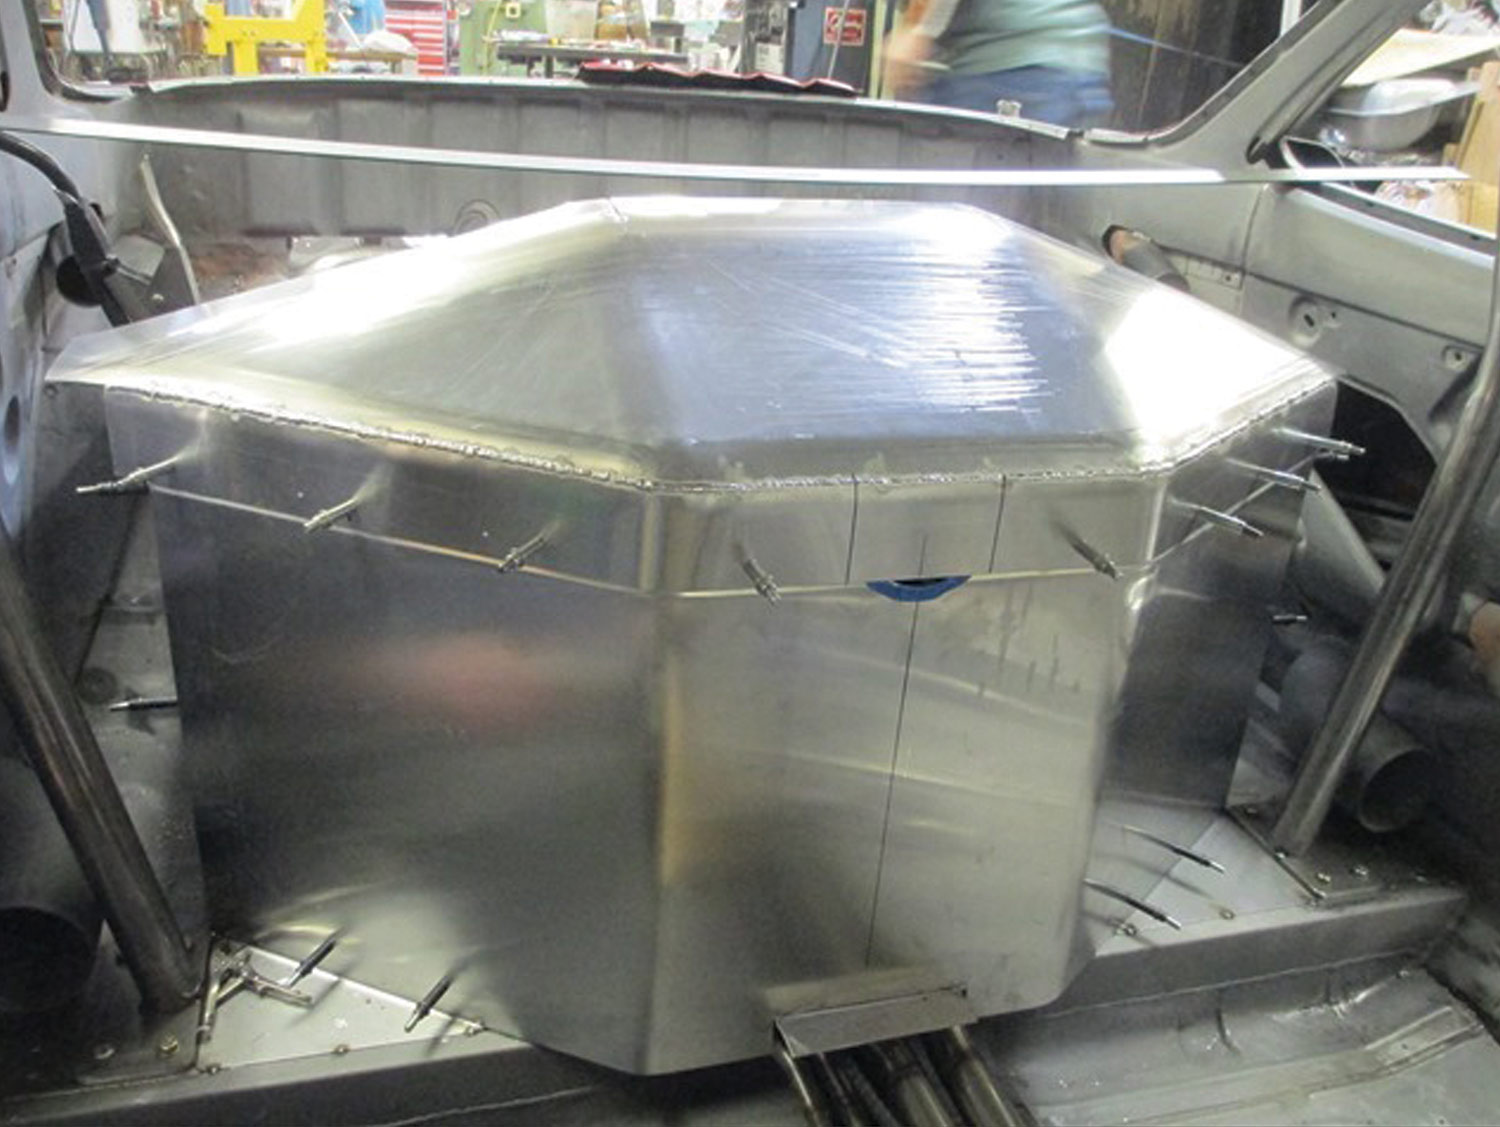 a two-piece aluminum “dog house” fabricated by Marty Strode covers the mid-mounted V-8